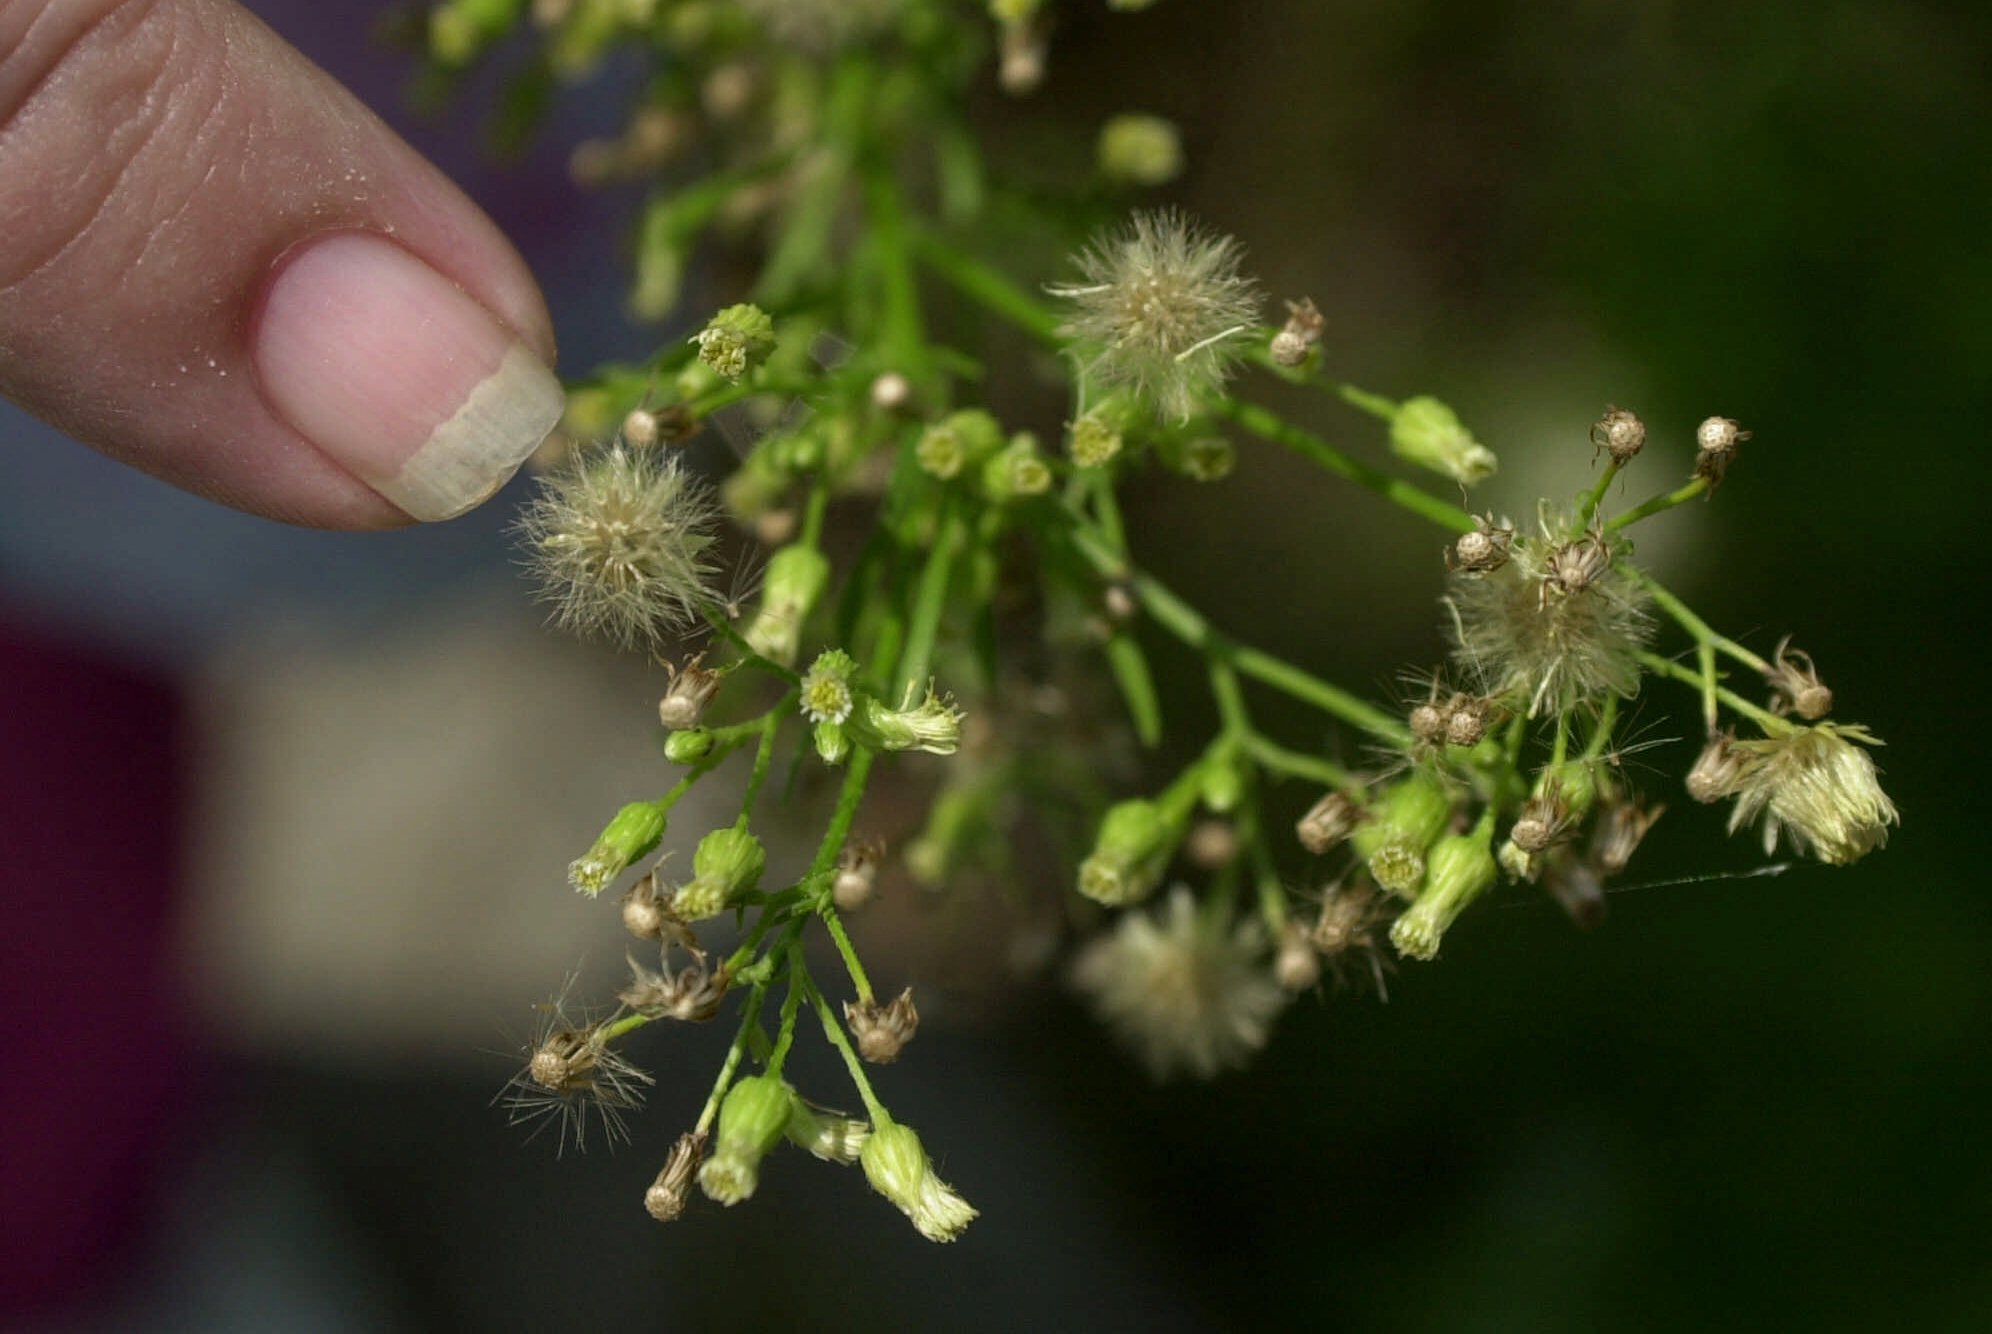 A woman points to the pollen on a plant